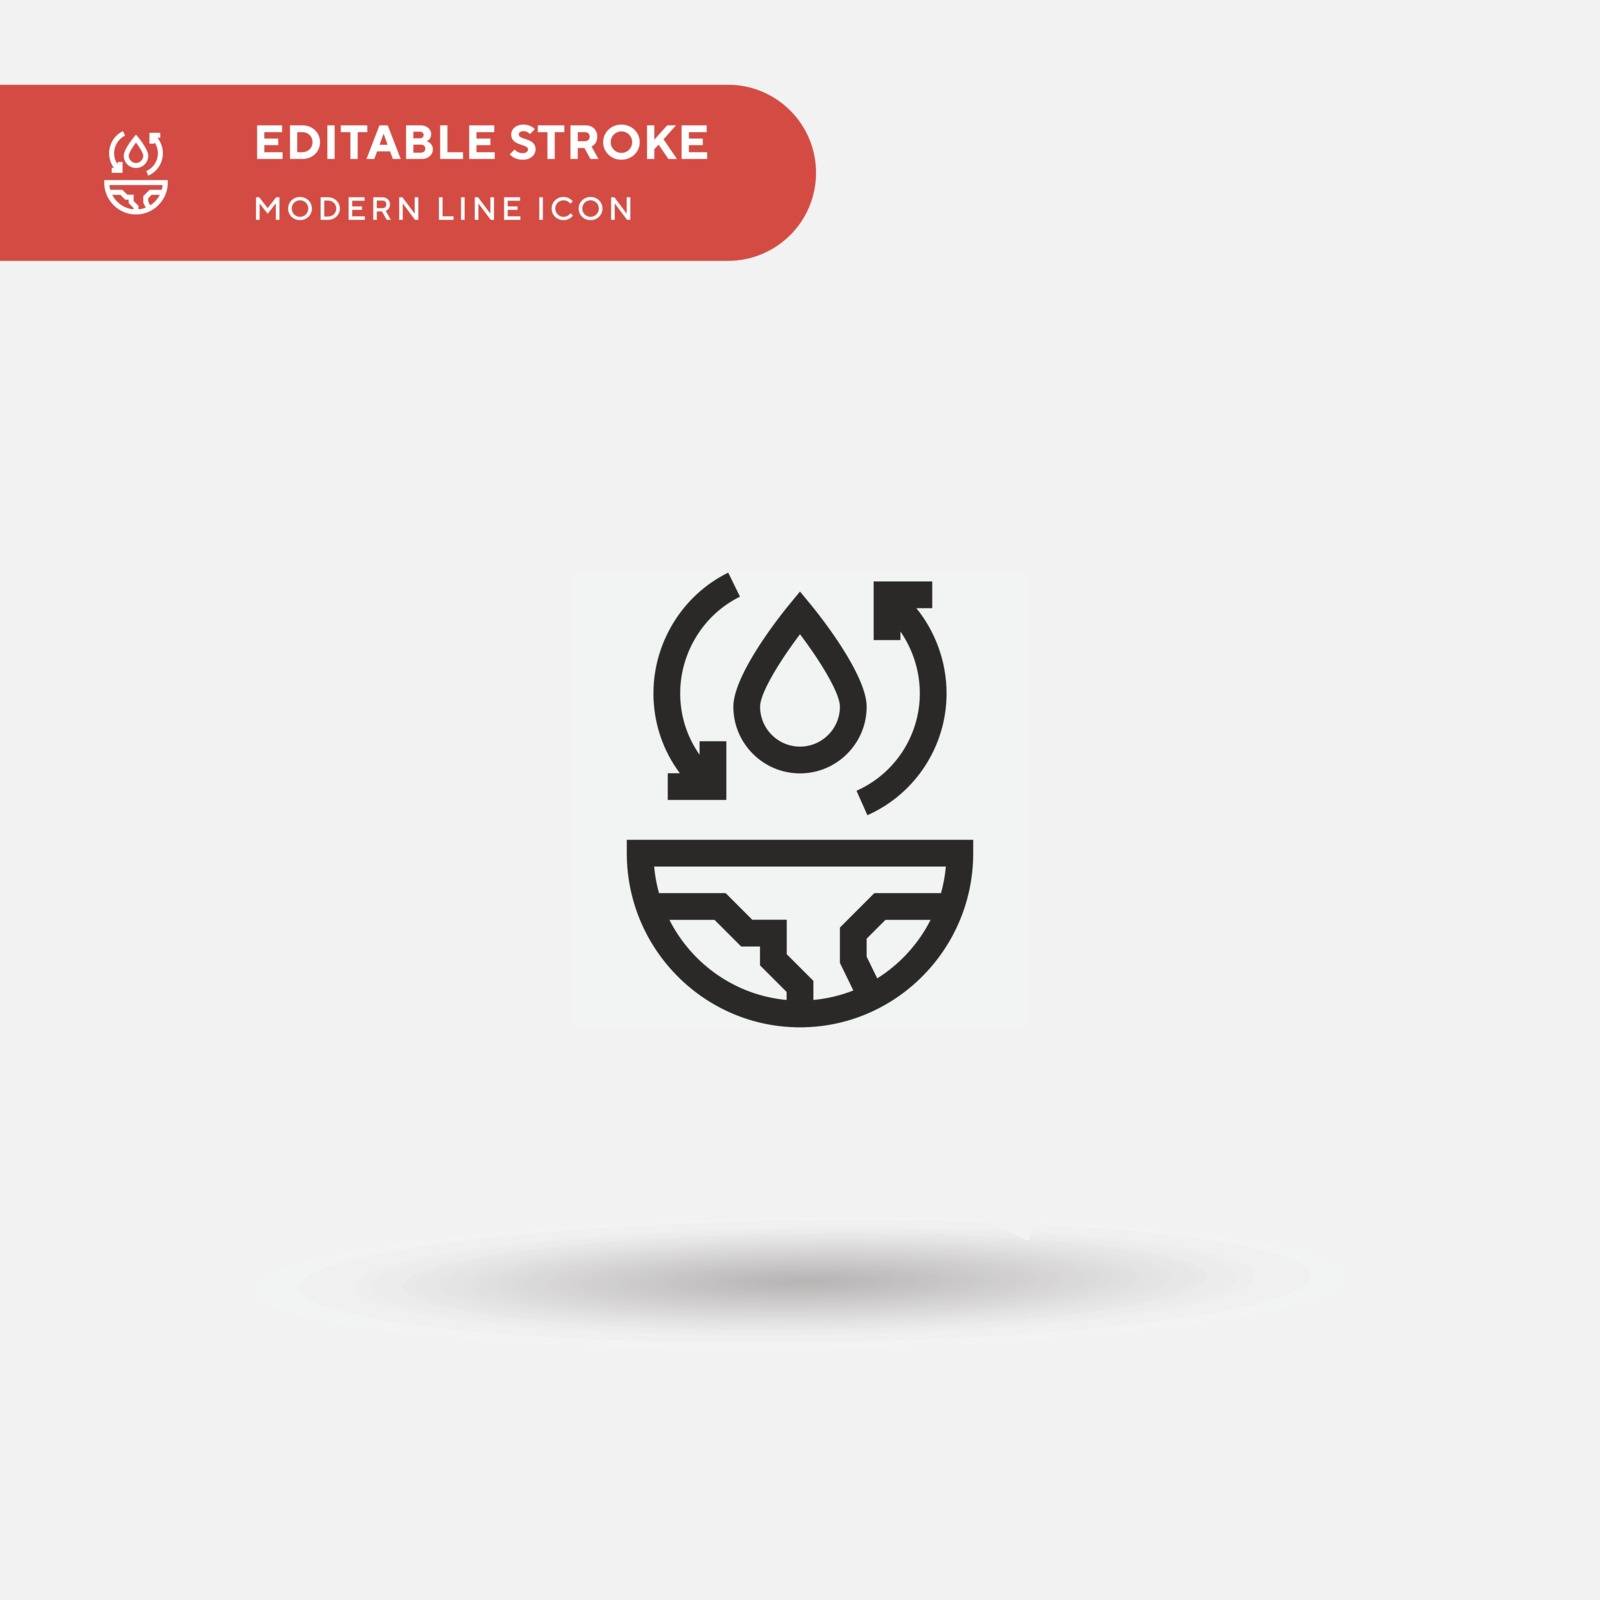 Reuse Water Simple vector icon. Illustration symbol design templ by guapoo